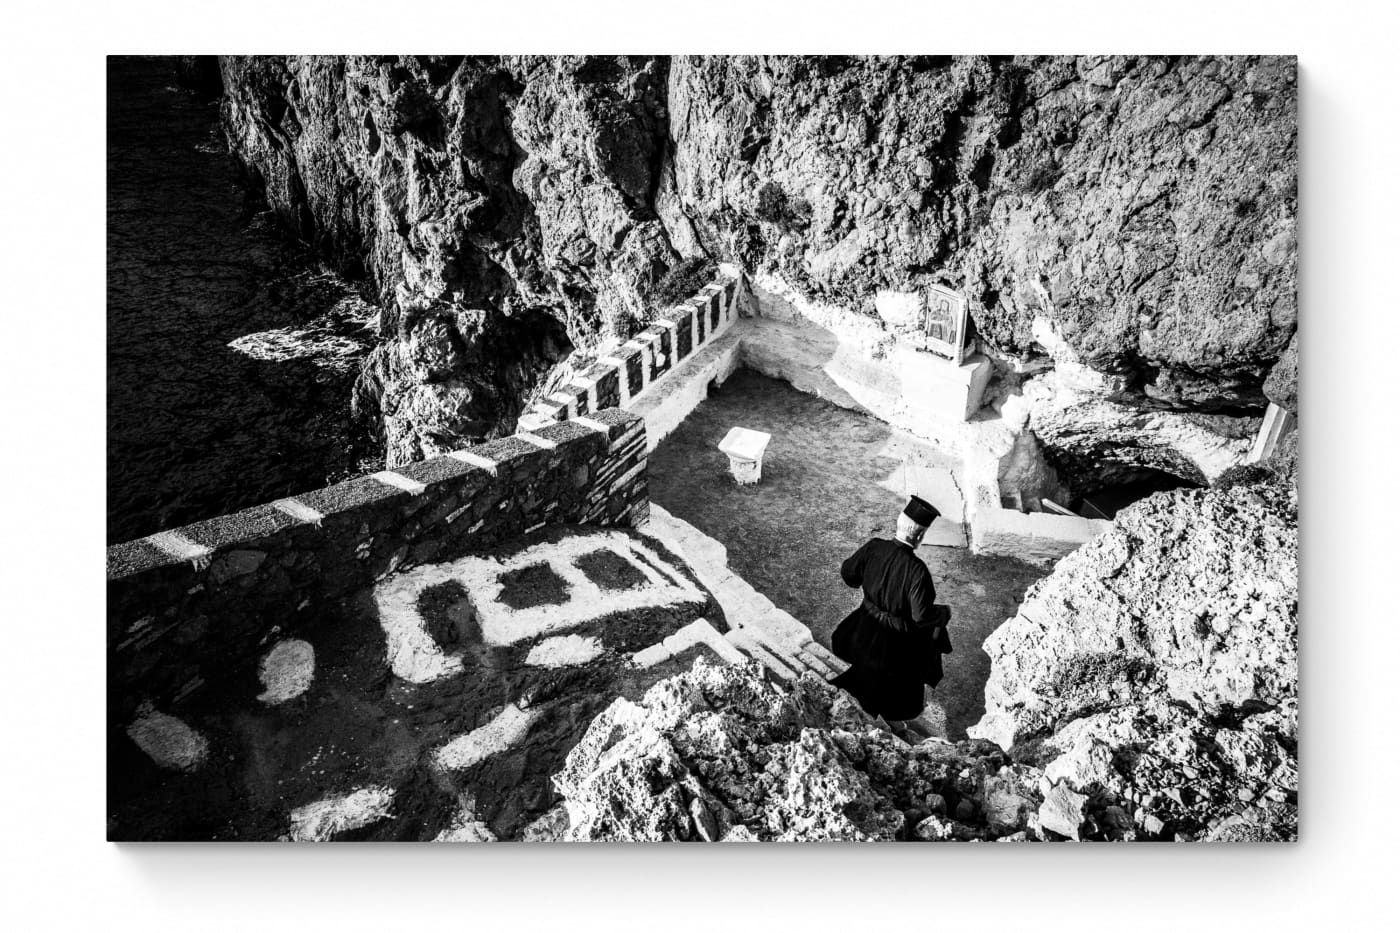 Black and White Photography Wall Art Greece | Priest descending to the St. John church in Vrykounta Olympos Karpathos Dodecanese by George Tatakis - whole photo